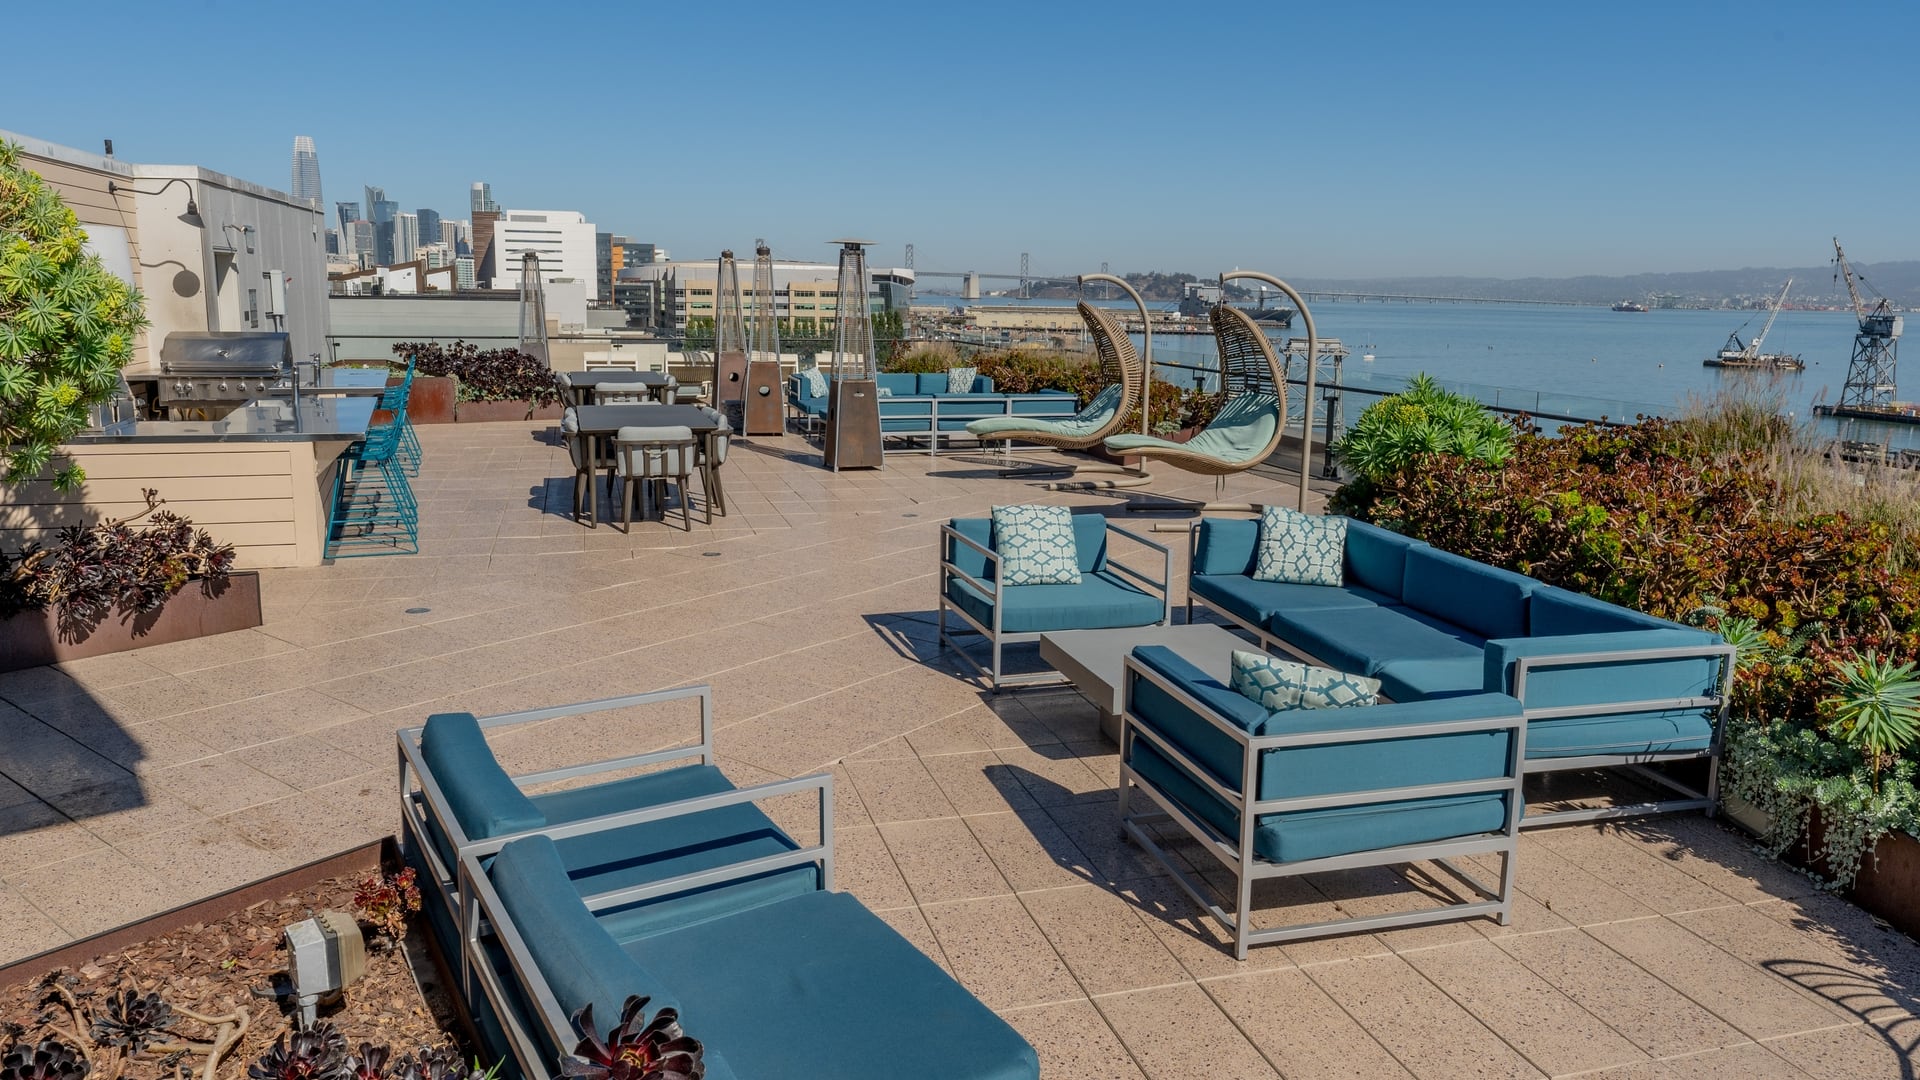 Dogpatch Apartments for Rent - Potrero Launch - Sky Lounge with Patio Furniture, BBQ’s, and Views of the Bay.